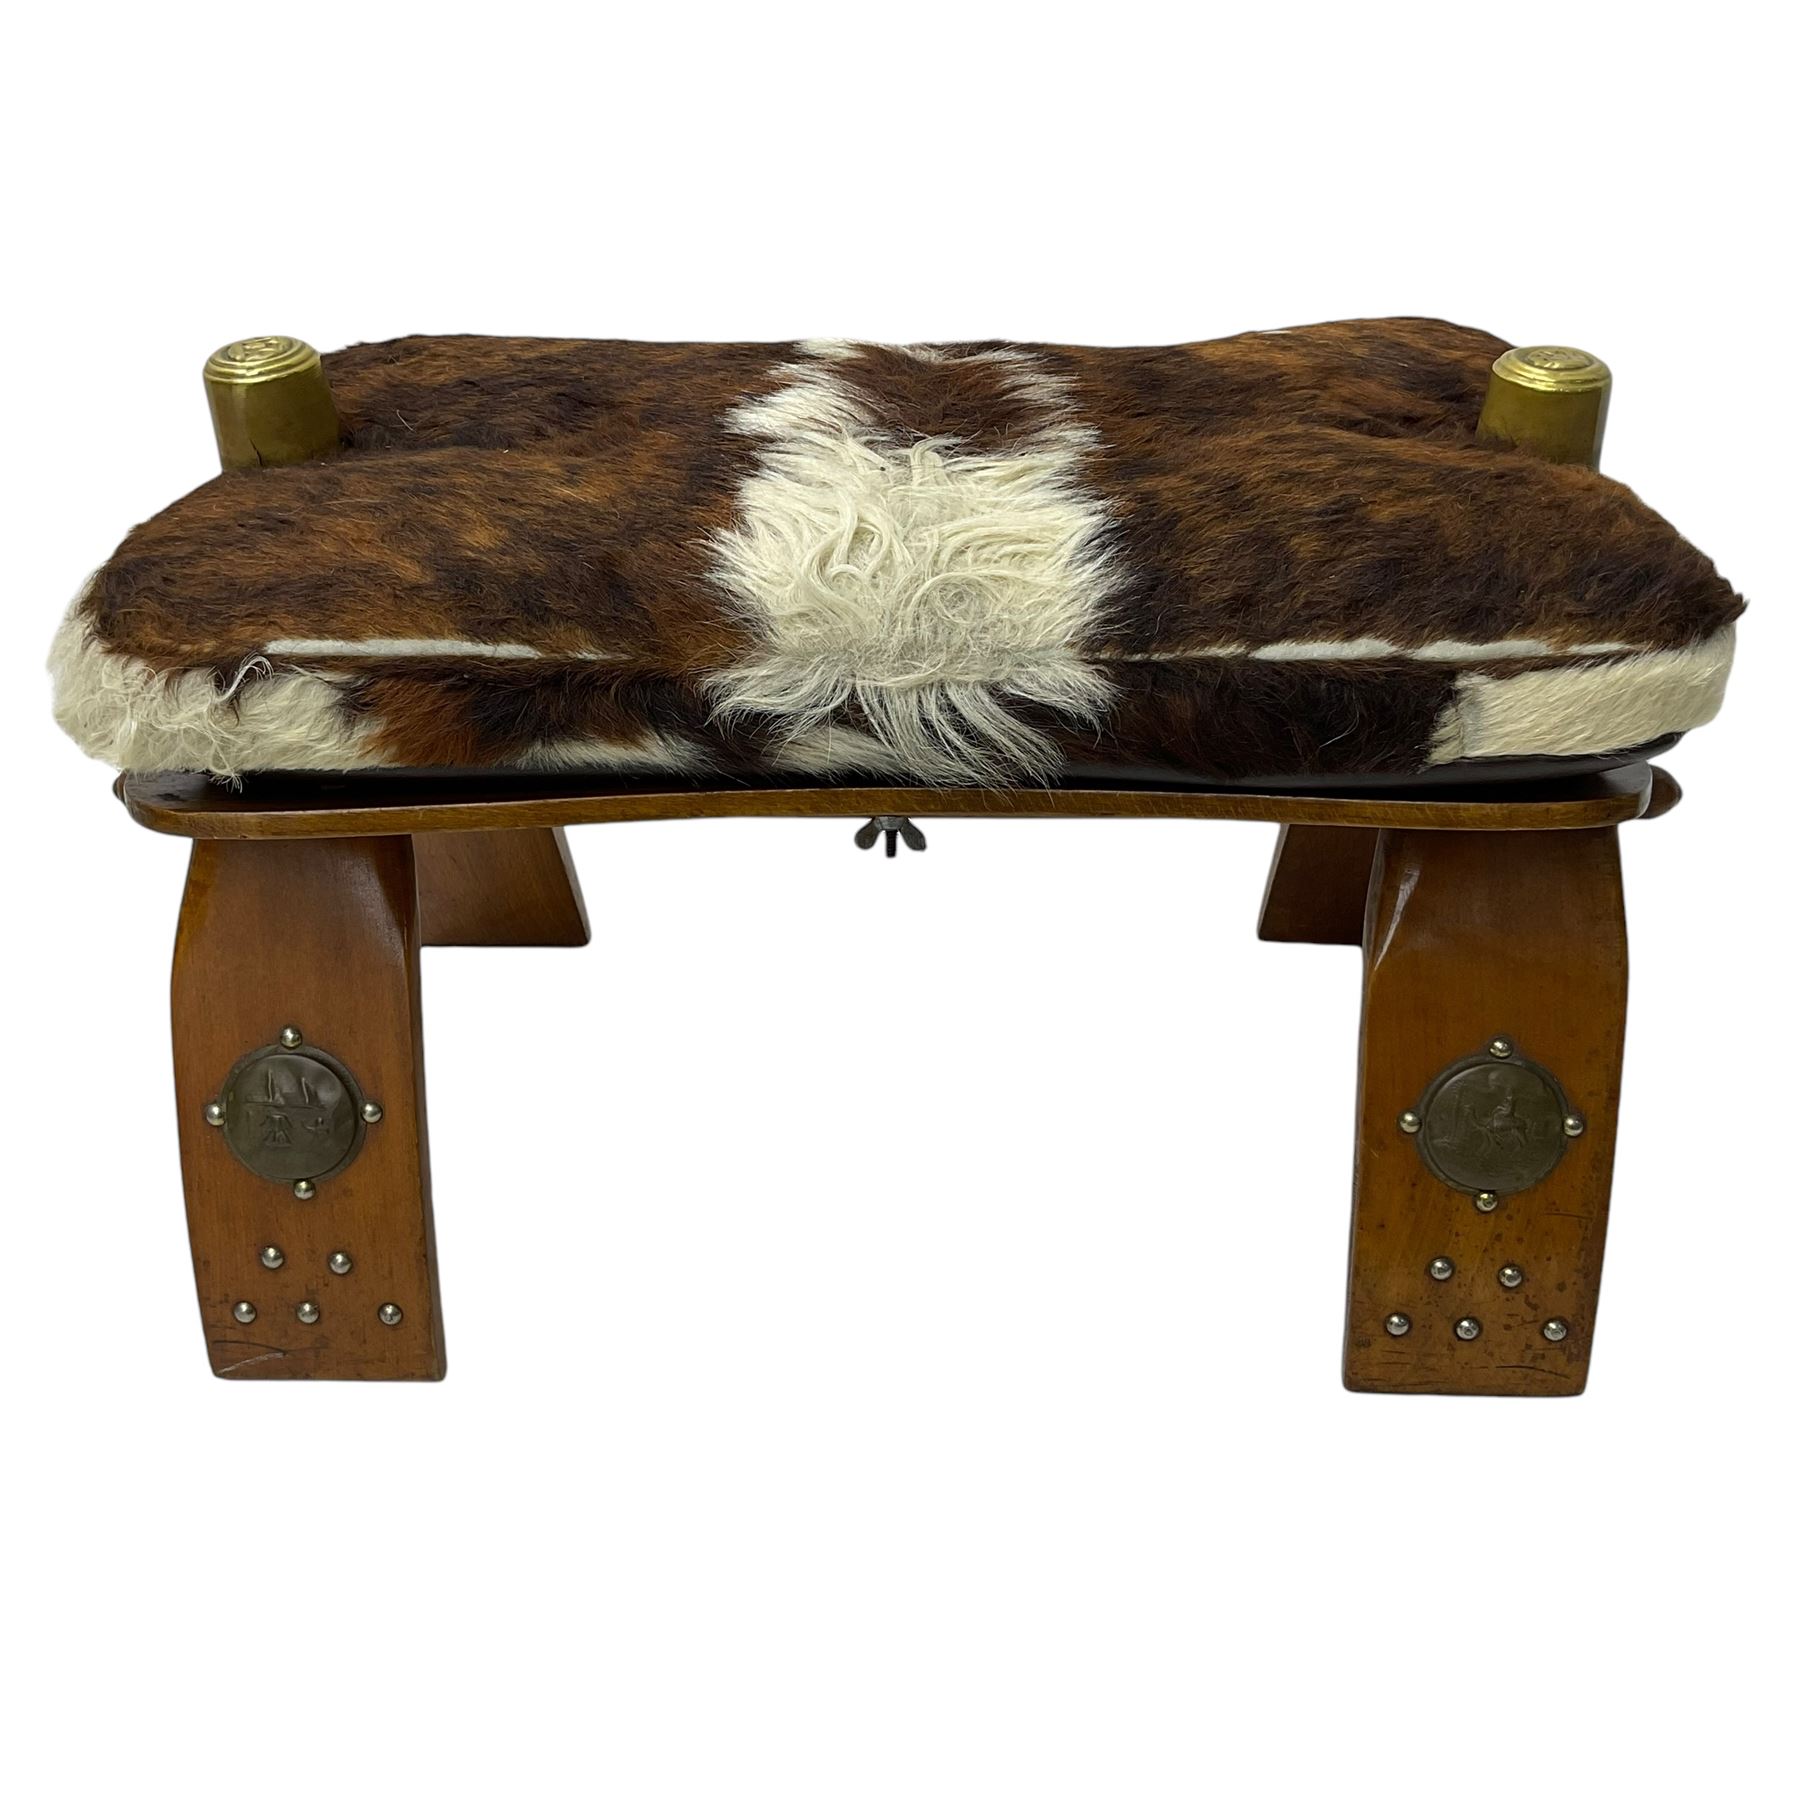 20th century beech saddle stool with hide cushion - Image 2 of 4